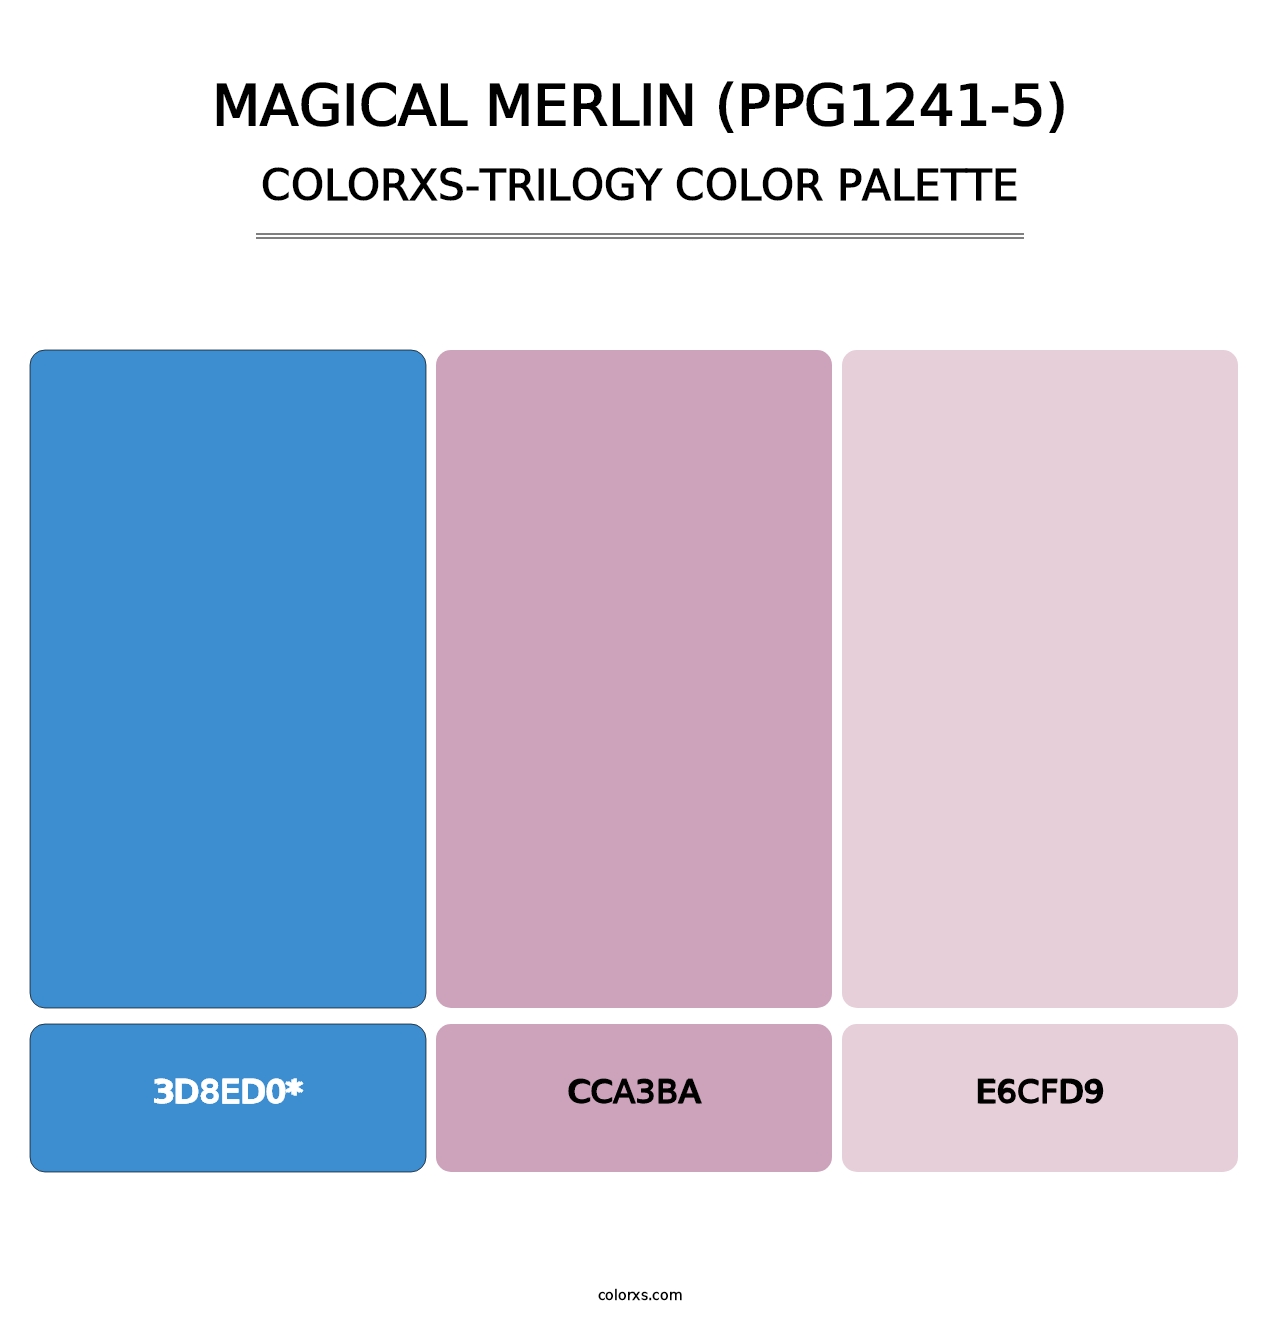 Magical Merlin (PPG1241-5) - Colorxs Trilogy Palette